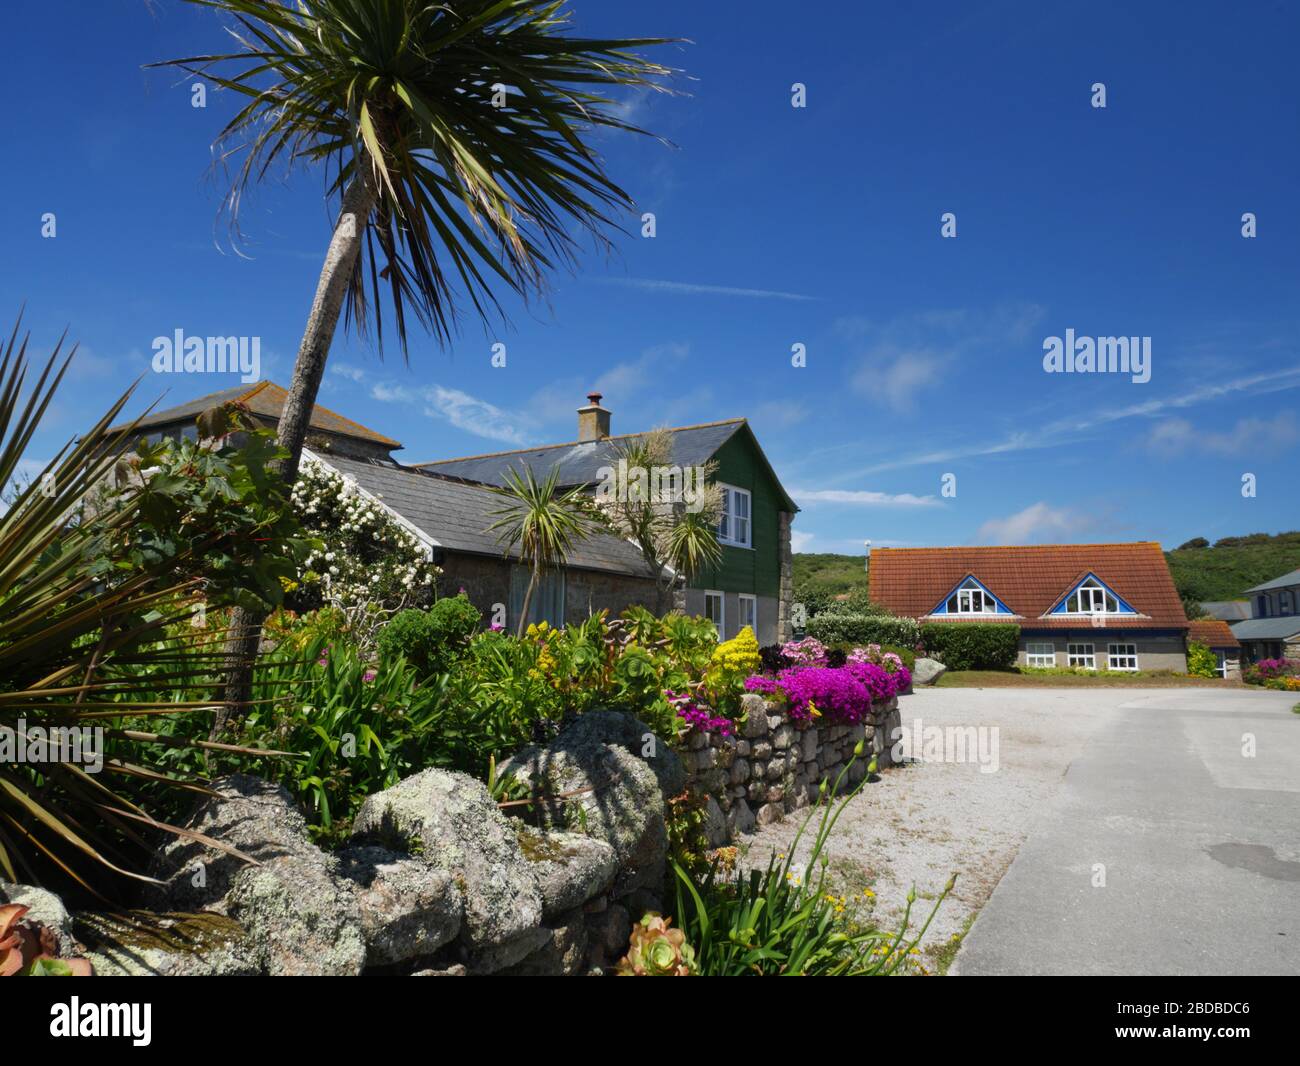 New Grimsby, Tresco, Isles of Scilly Banque D'Images